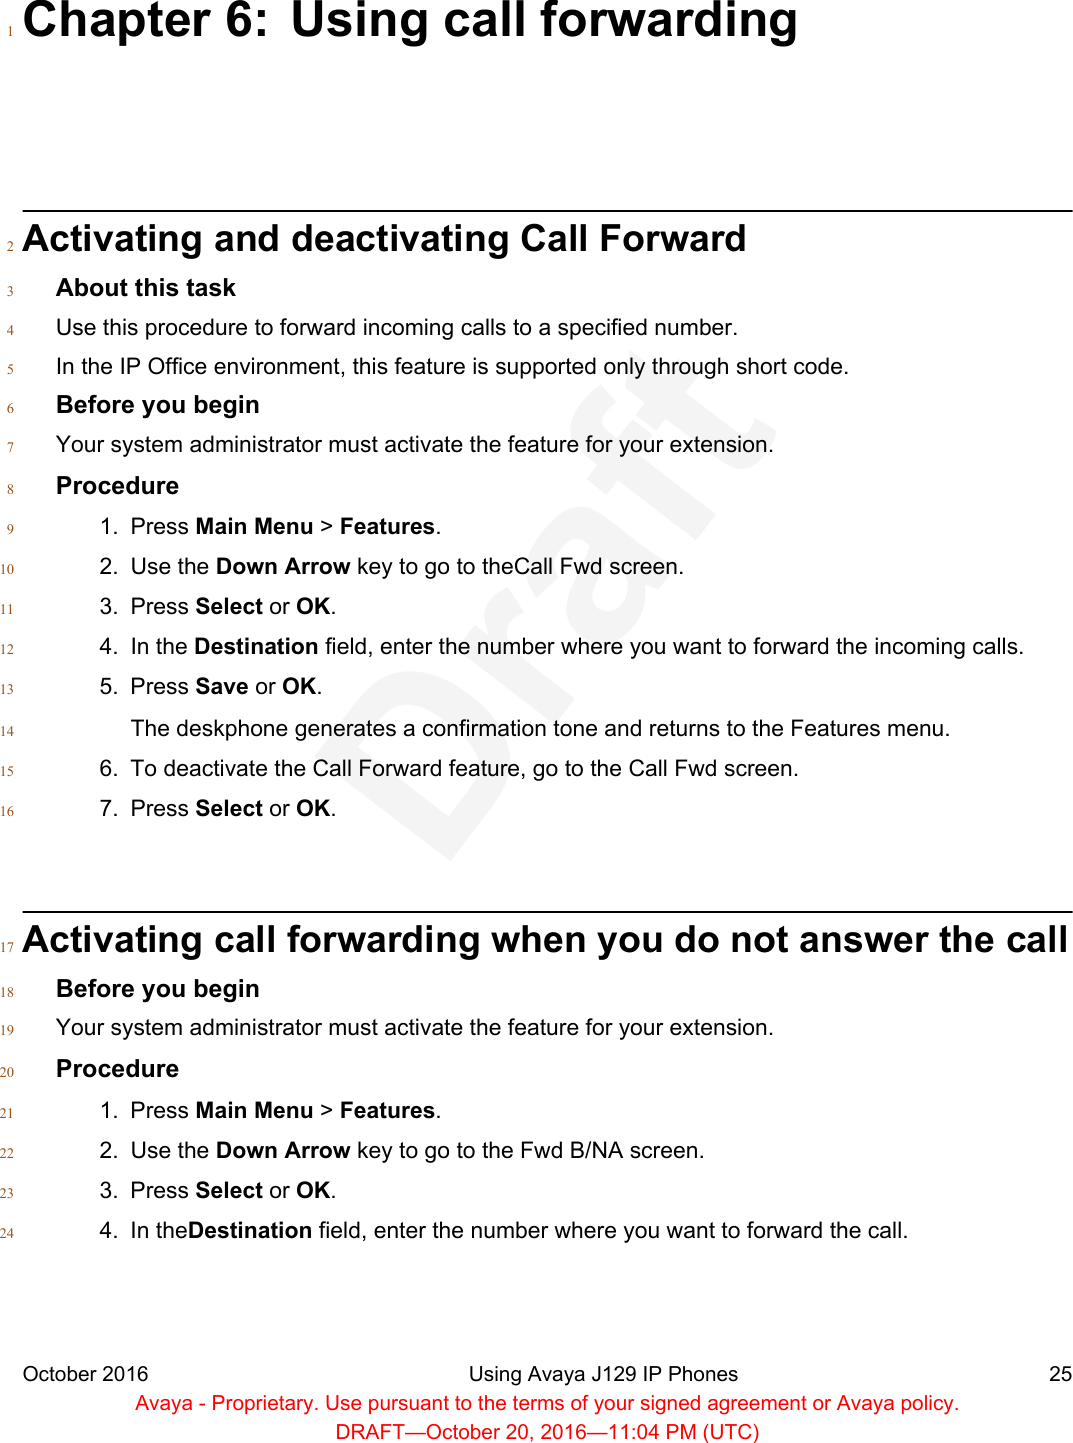 Chapter 6: Using call forwarding1Activating and deactivating Call Forward2About this task3Use this procedure to forward incoming calls to a specified number.4In the IP Office environment, this feature is supported only through short code.5Before you begin6Your system administrator must activate the feature for your extension.7Procedure81. Press Main Menu &gt; Features.92. Use the Down Arrow key to go to theCall Fwd screen.103. Press Select or OK.114. In the Destination field, enter the number where you want to forward the incoming calls.125. Press Save or OK.13The deskphone generates a confirmation tone and returns to the Features menu.146. To deactivate the Call Forward feature, go to the Call Fwd screen.157. Press Select or OK.16Activating call forwarding when you do not answer the call17Before you begin18Your system administrator must activate the feature for your extension.19Procedure201. Press Main Menu &gt; Features.212. Use the Down Arrow key to go to the Fwd B/NA screen.223. Press Select or OK.234. In theDestination field, enter the number where you want to forward the call.24October 2016 Using Avaya J129 IP Phones 25Avaya - Proprietary. Use pursuant to the terms of your signed agreement or Avaya policy.DRAFT—October 20, 2016—11:04 PM (UTC)